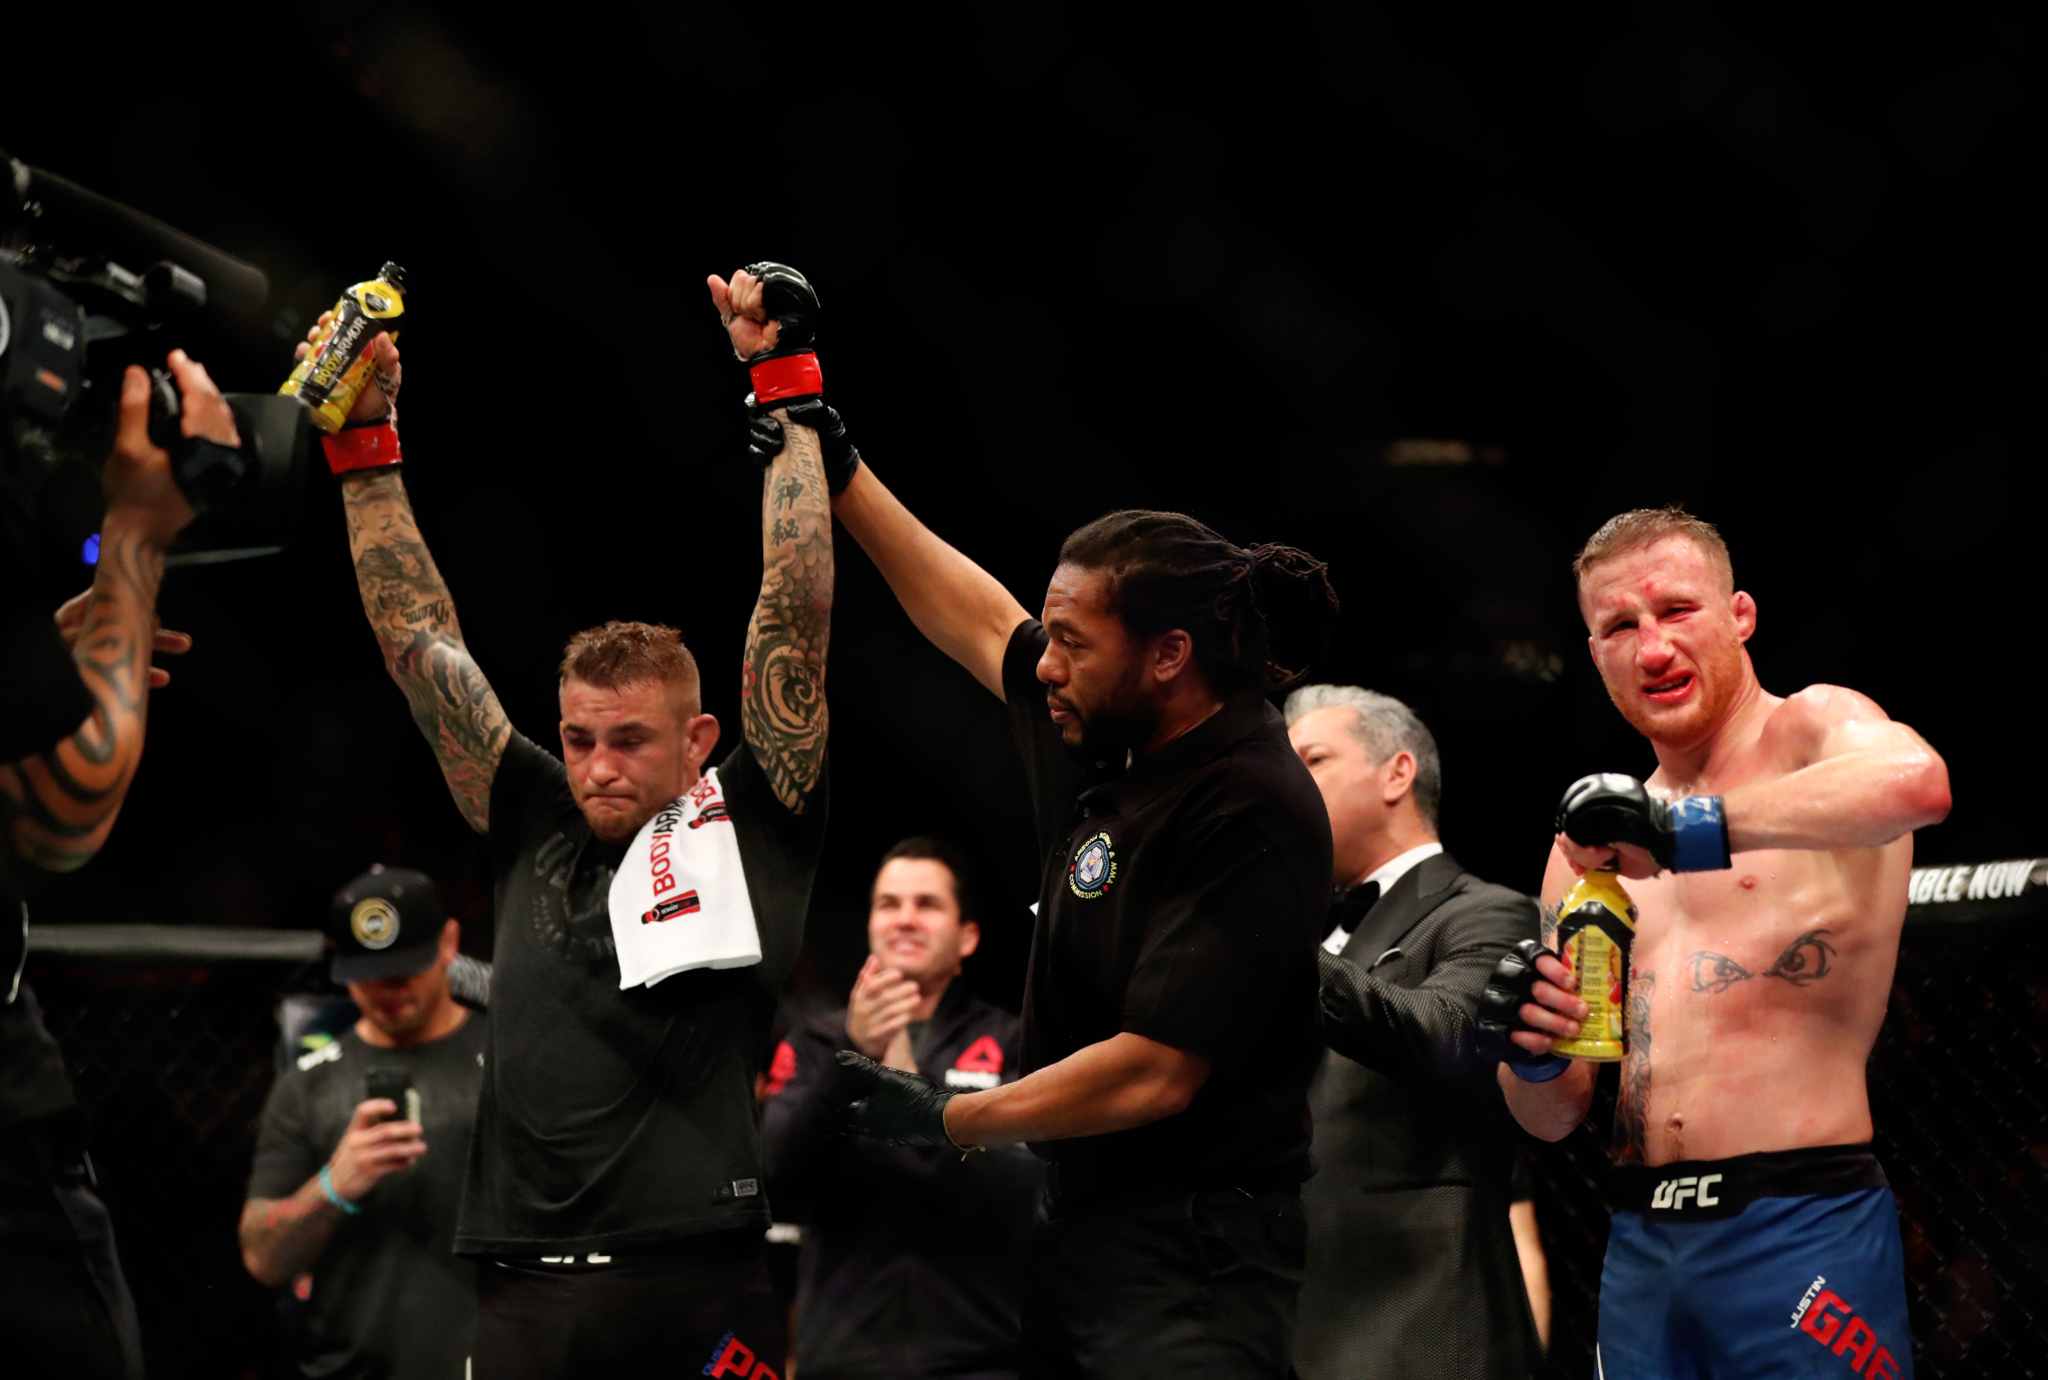 Justin Gaethje next fight 'The Highlight' competes for BMF title at